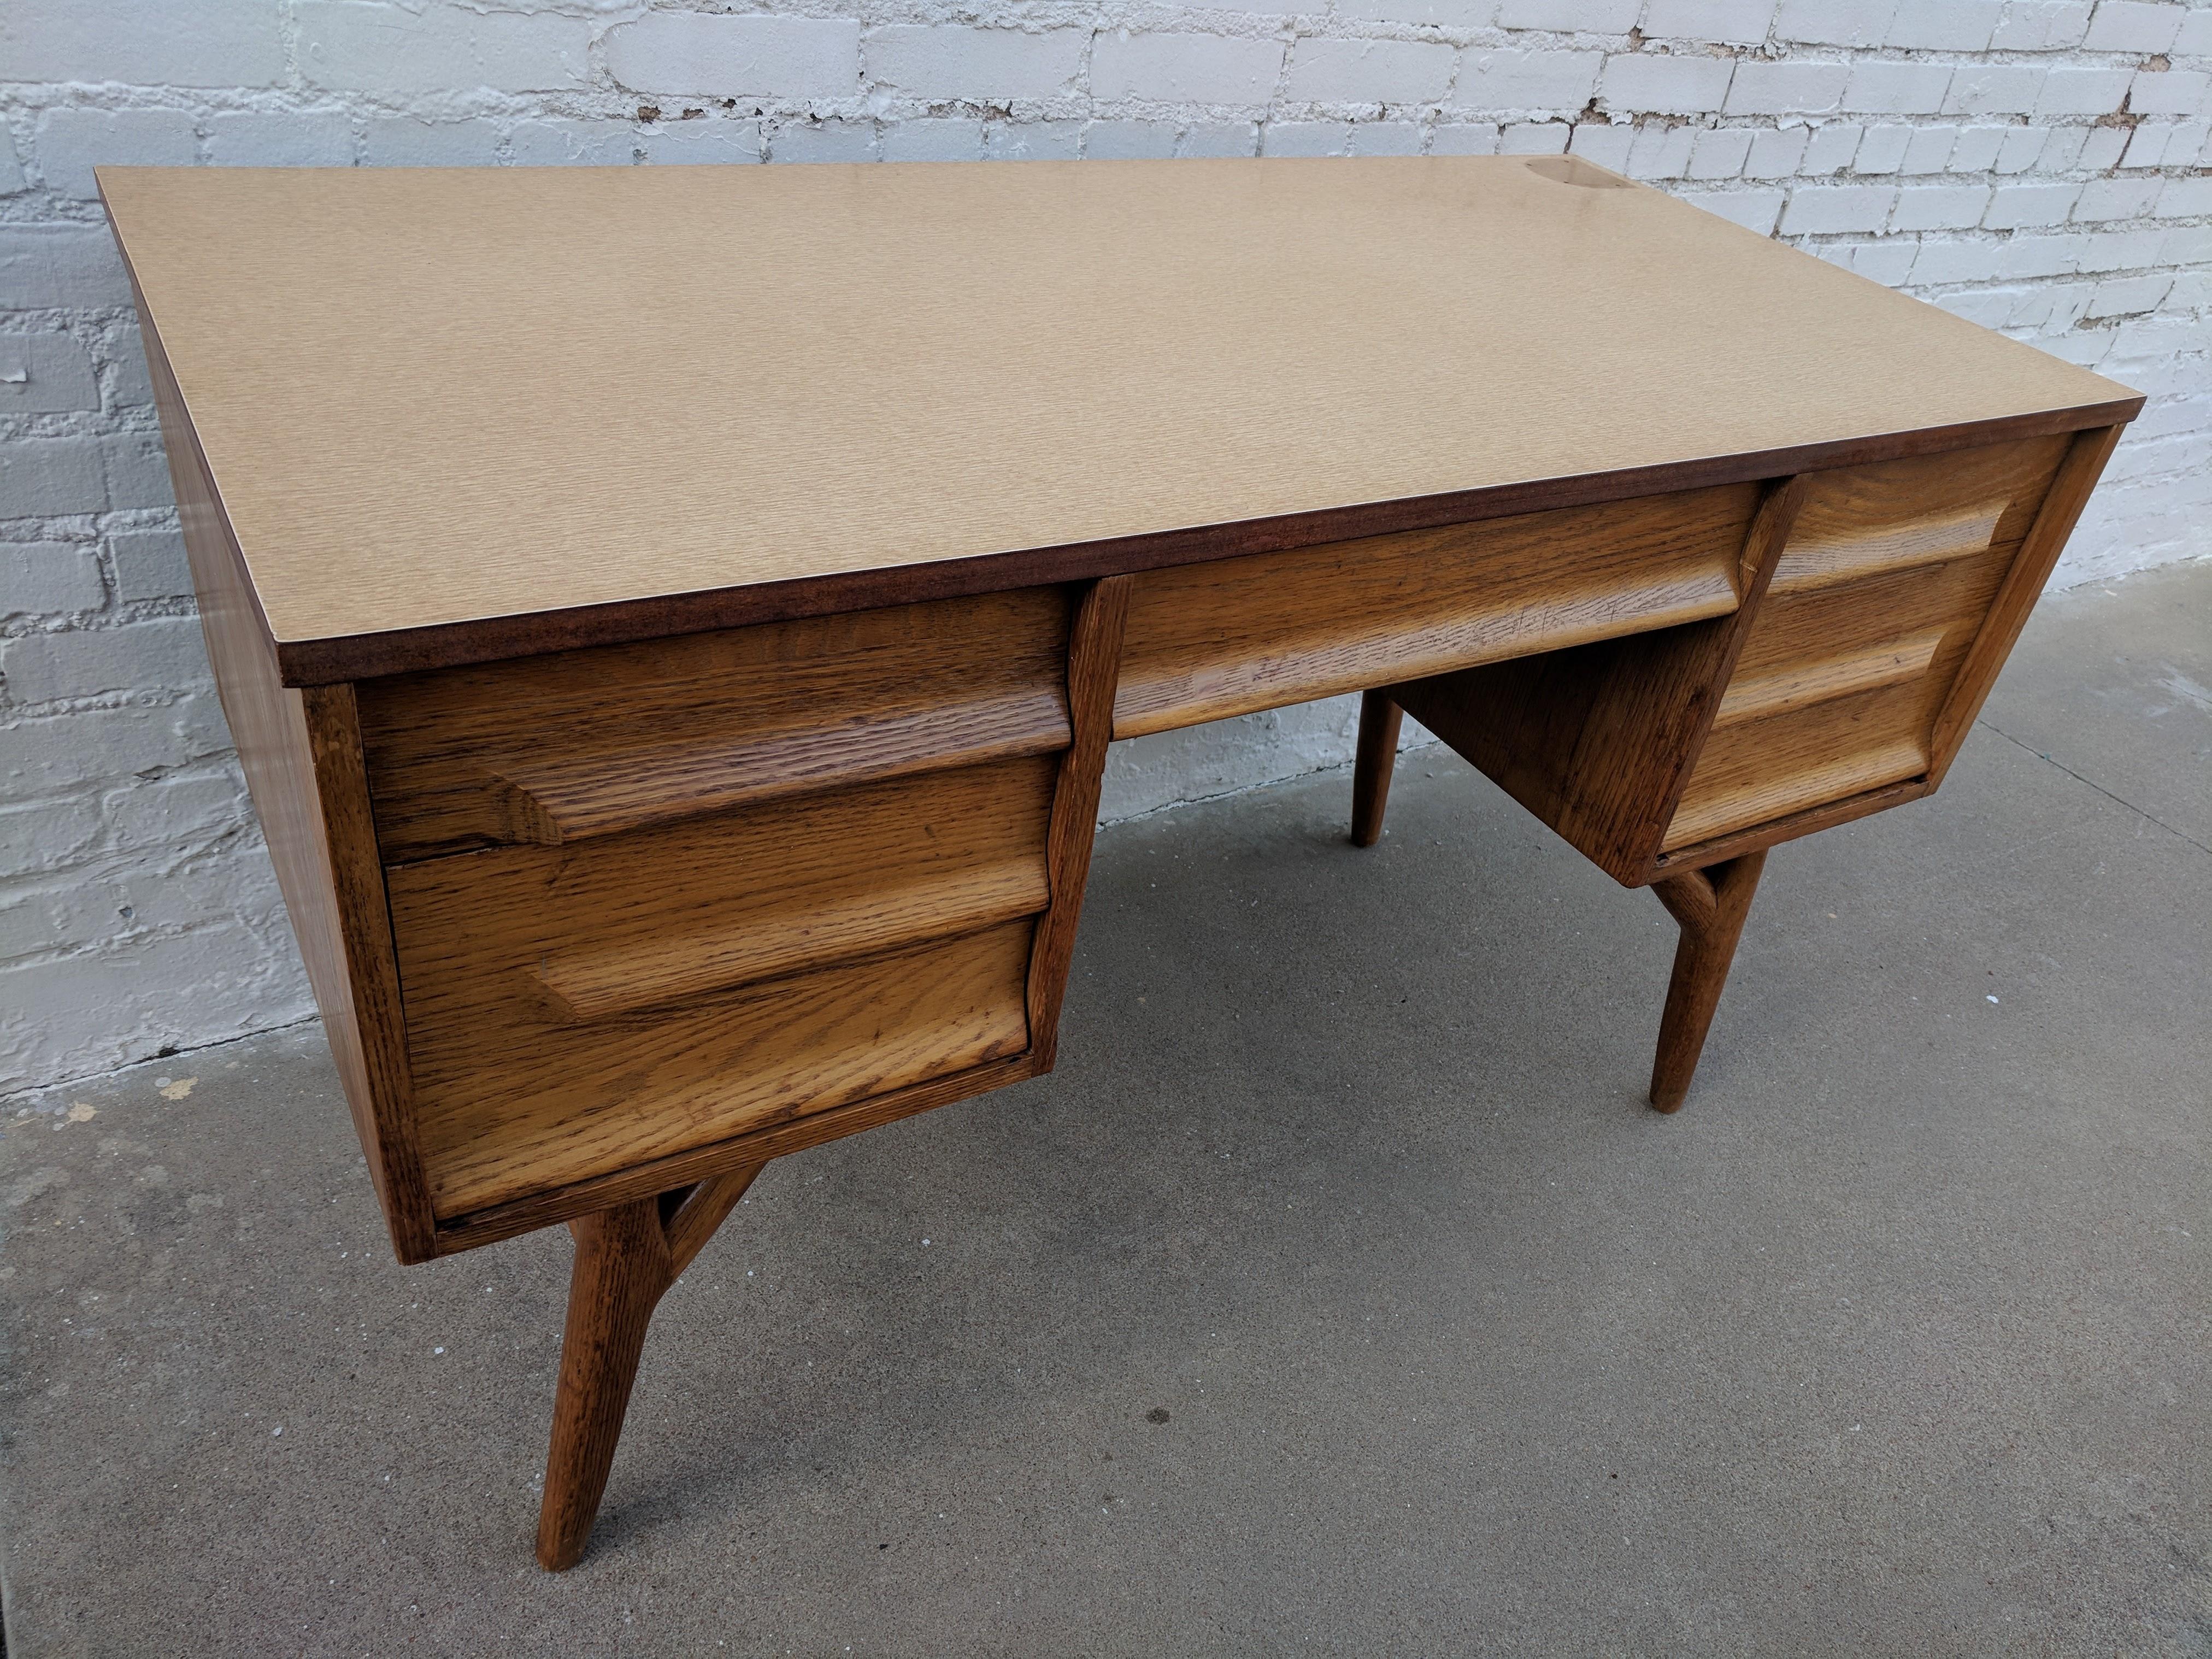 20th Century Mid Century Modern Solid Oak Desk with Laminate Top For Sale